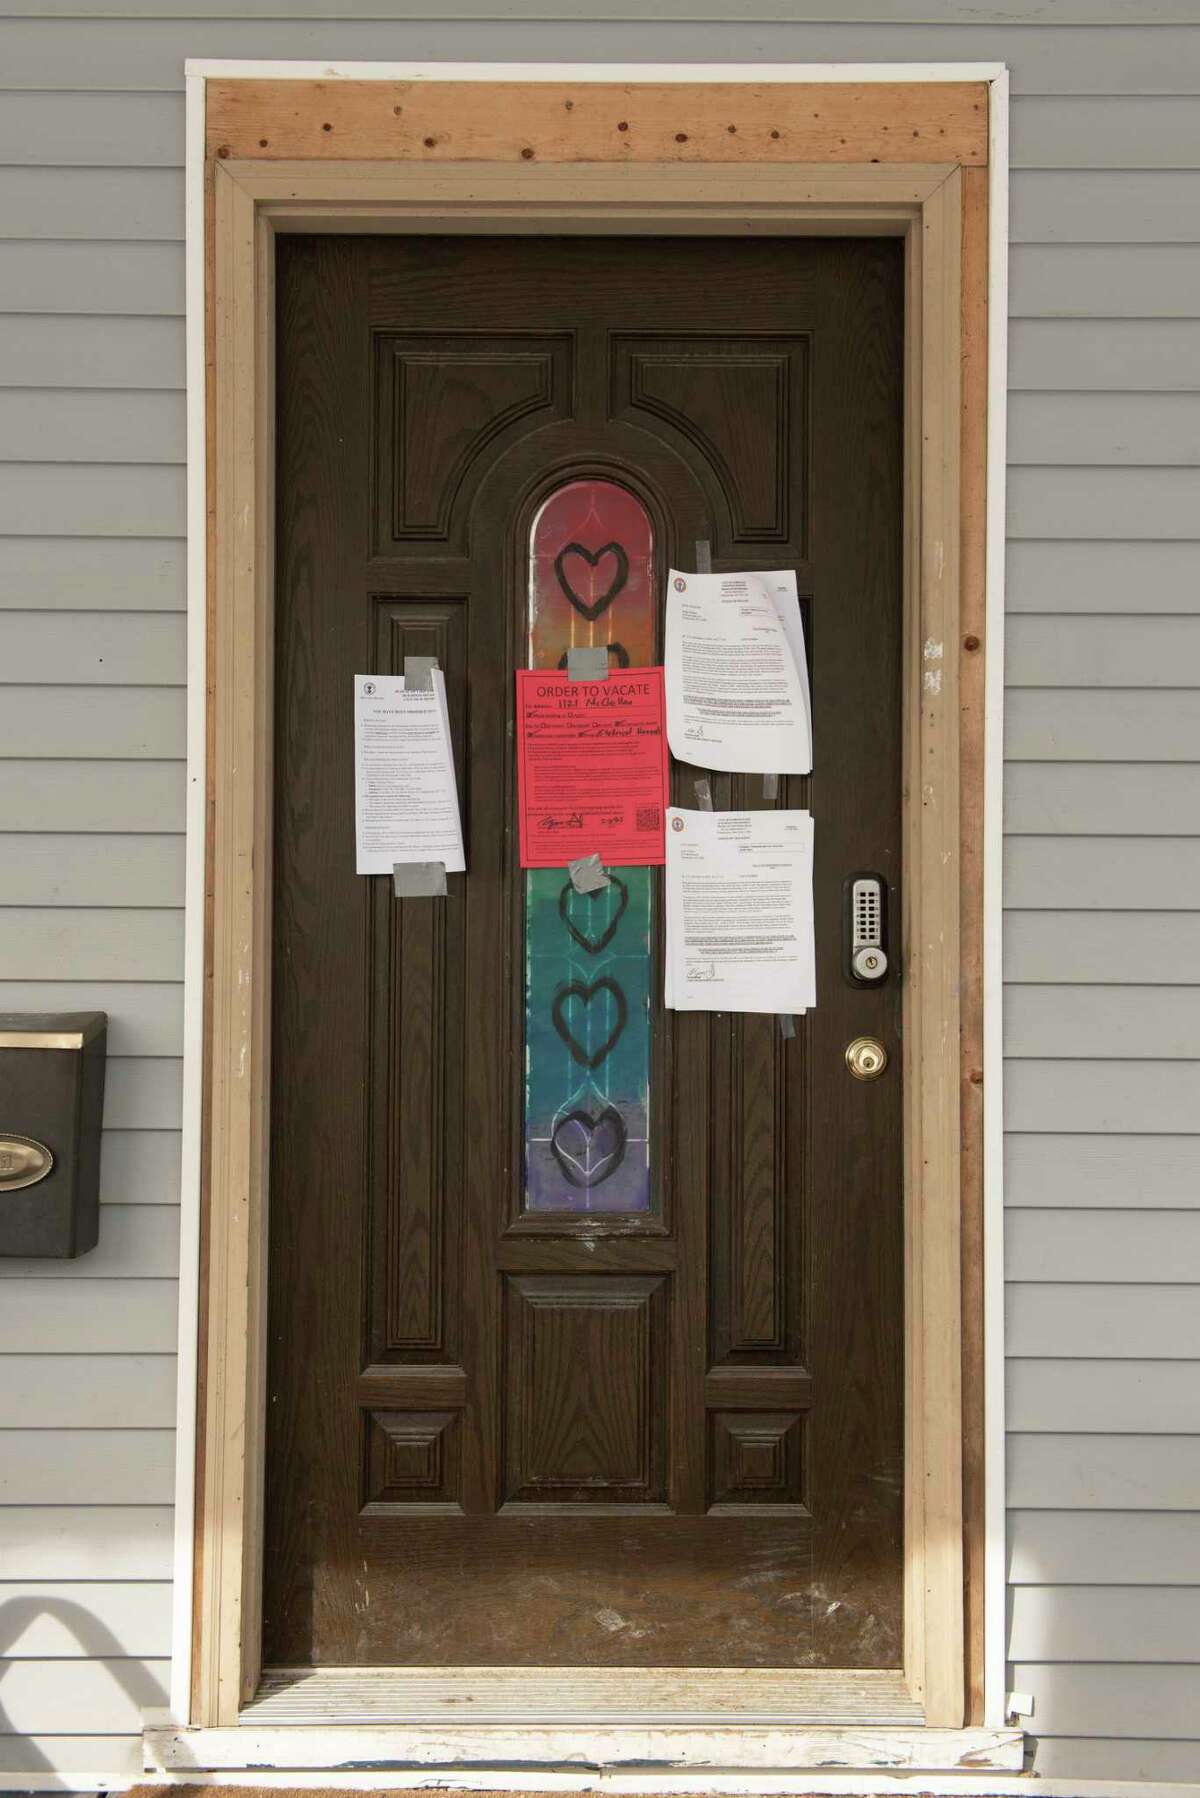 City vacate papers are seen on the front door of 1121 McClellan St. on Monday Feb. 7, 2022 in Schenectady, N.Y. Emergency workers descended on this home to find a a dead woman and several children amid horrific conditions inside.